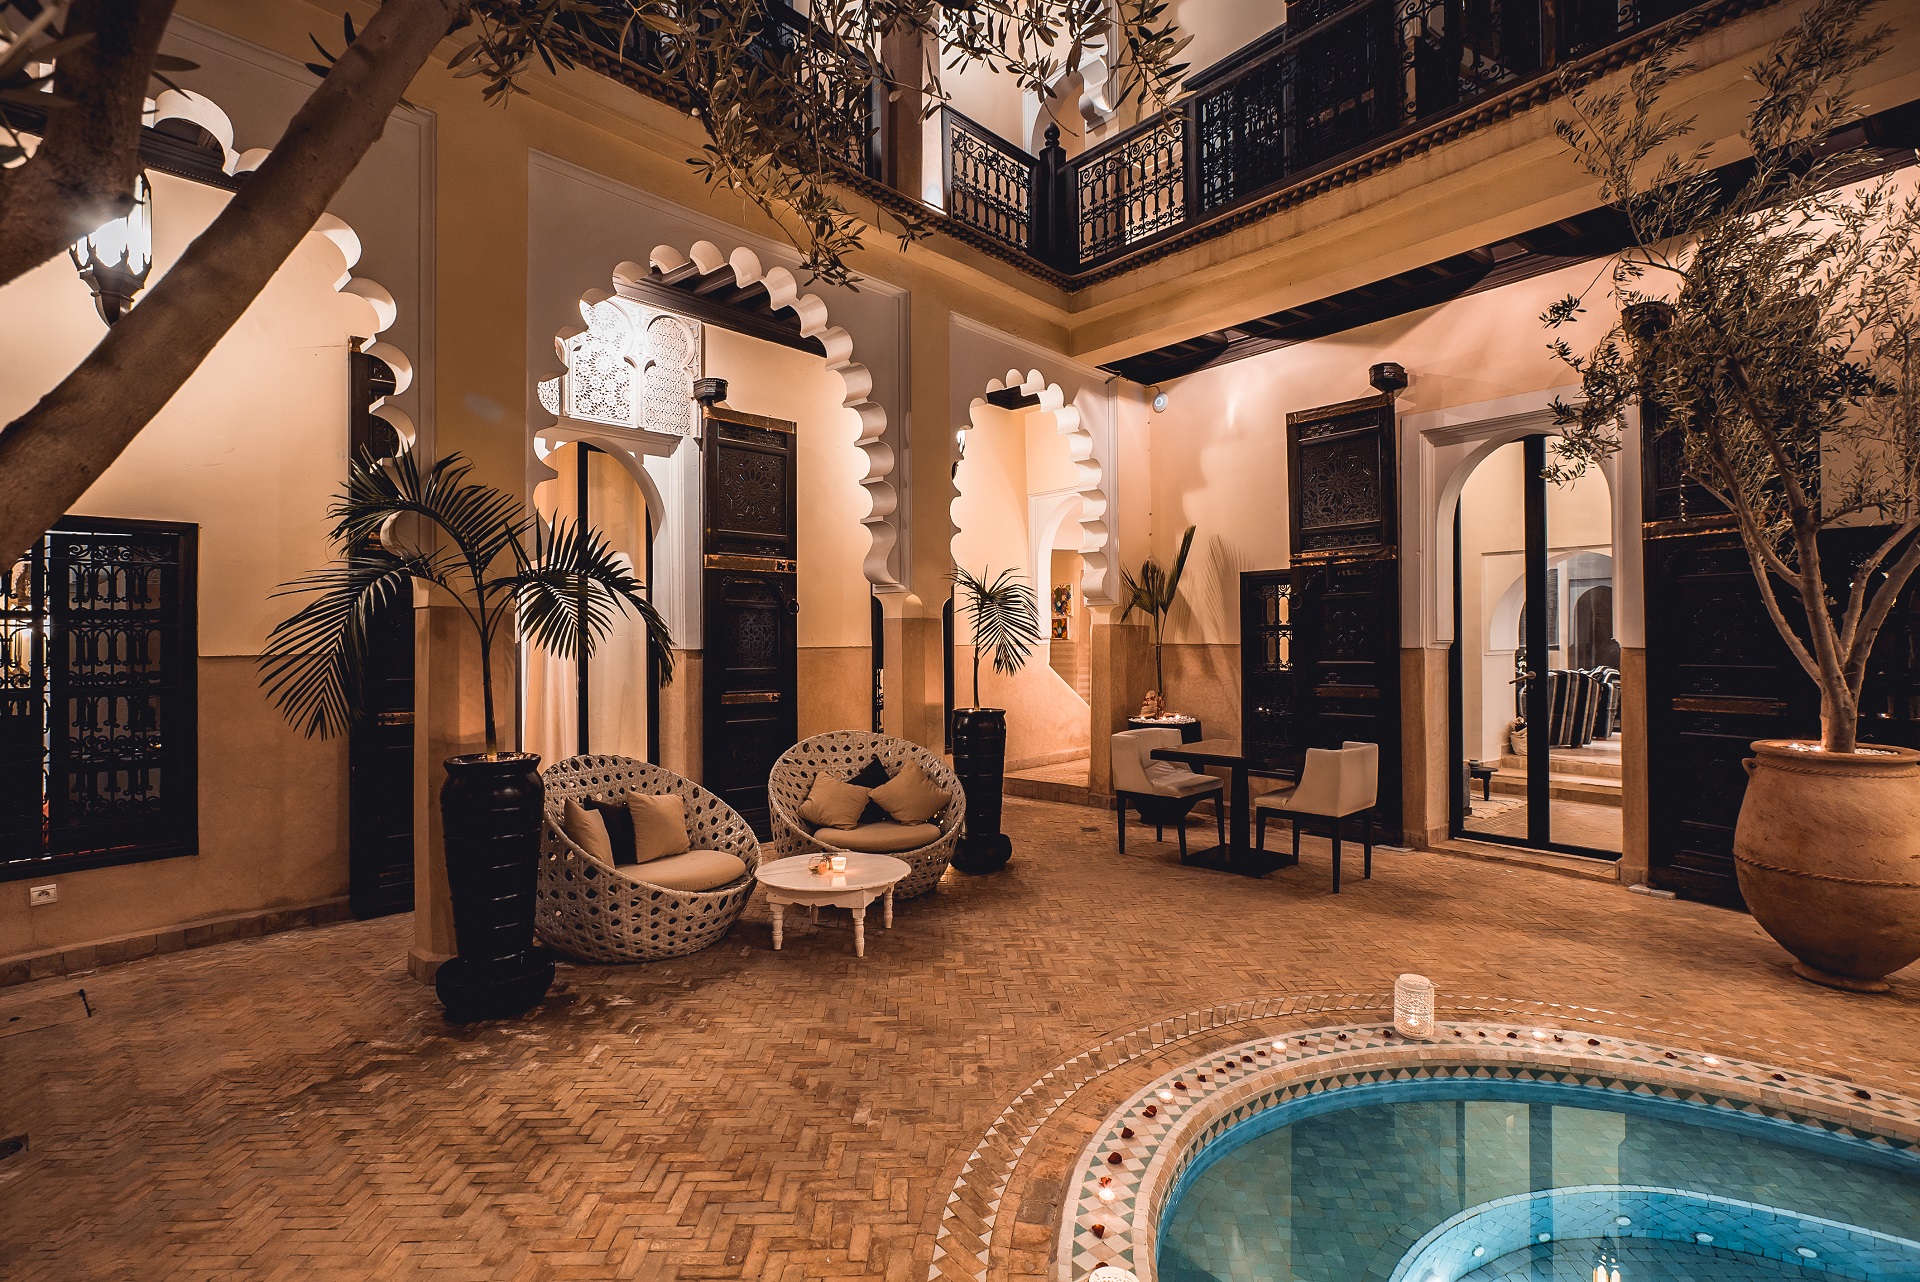 The medieval citadel of Marrakesh is the setting for the opulent Riad Anyr, a 12-bedroom, 12-bathroom mansion with an interior courtyard and a rooftop terrace with views of the Atlas Mountains.